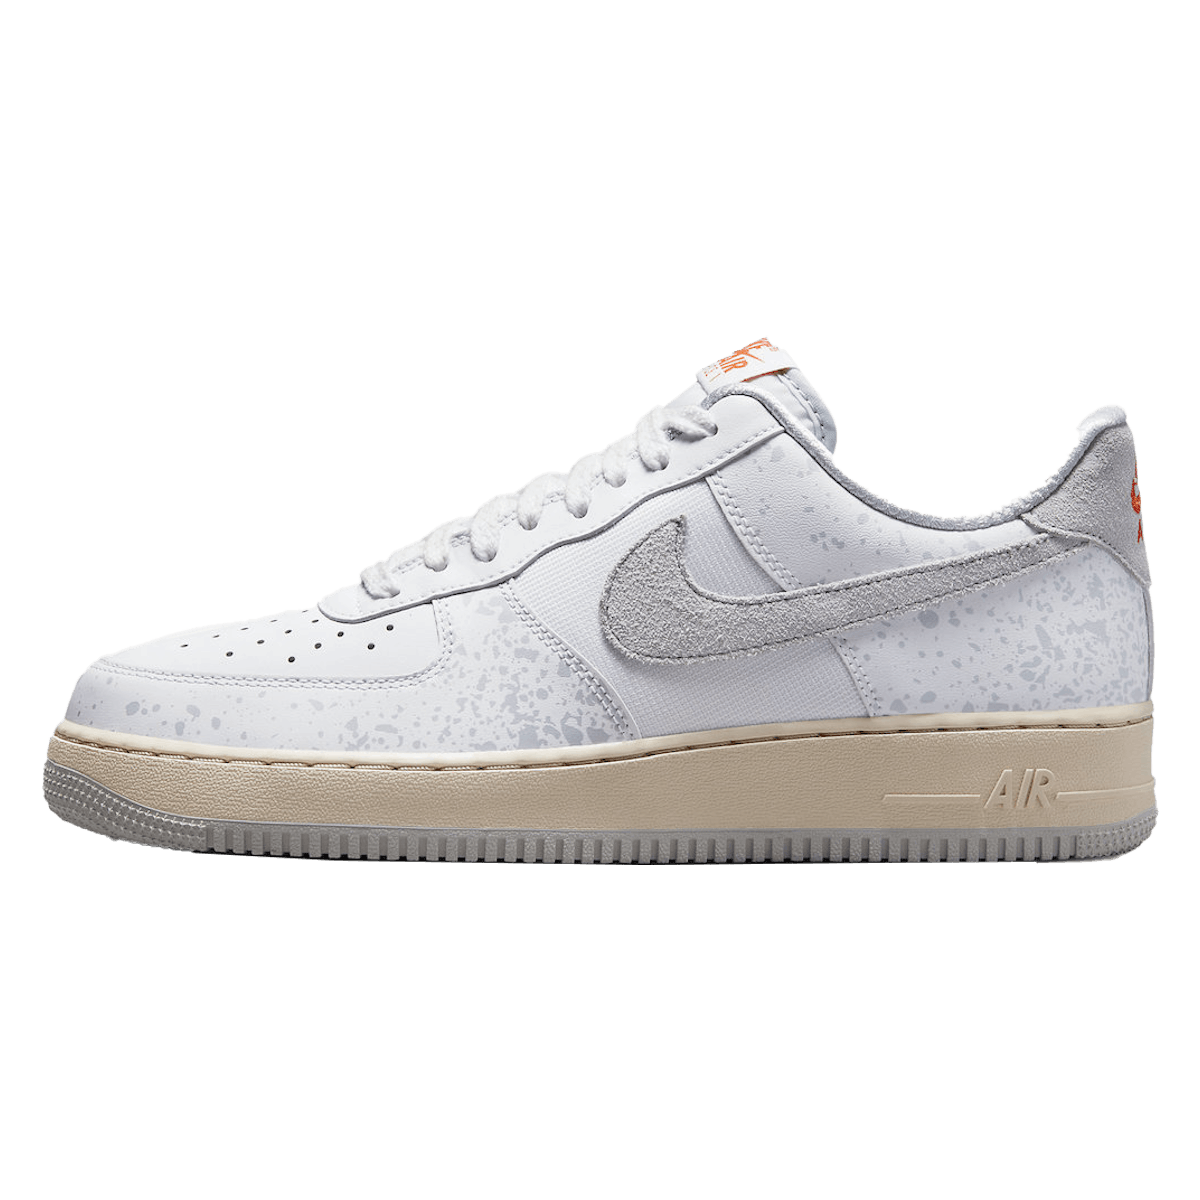 Nike Air Force 1 Low "Spray Paint"